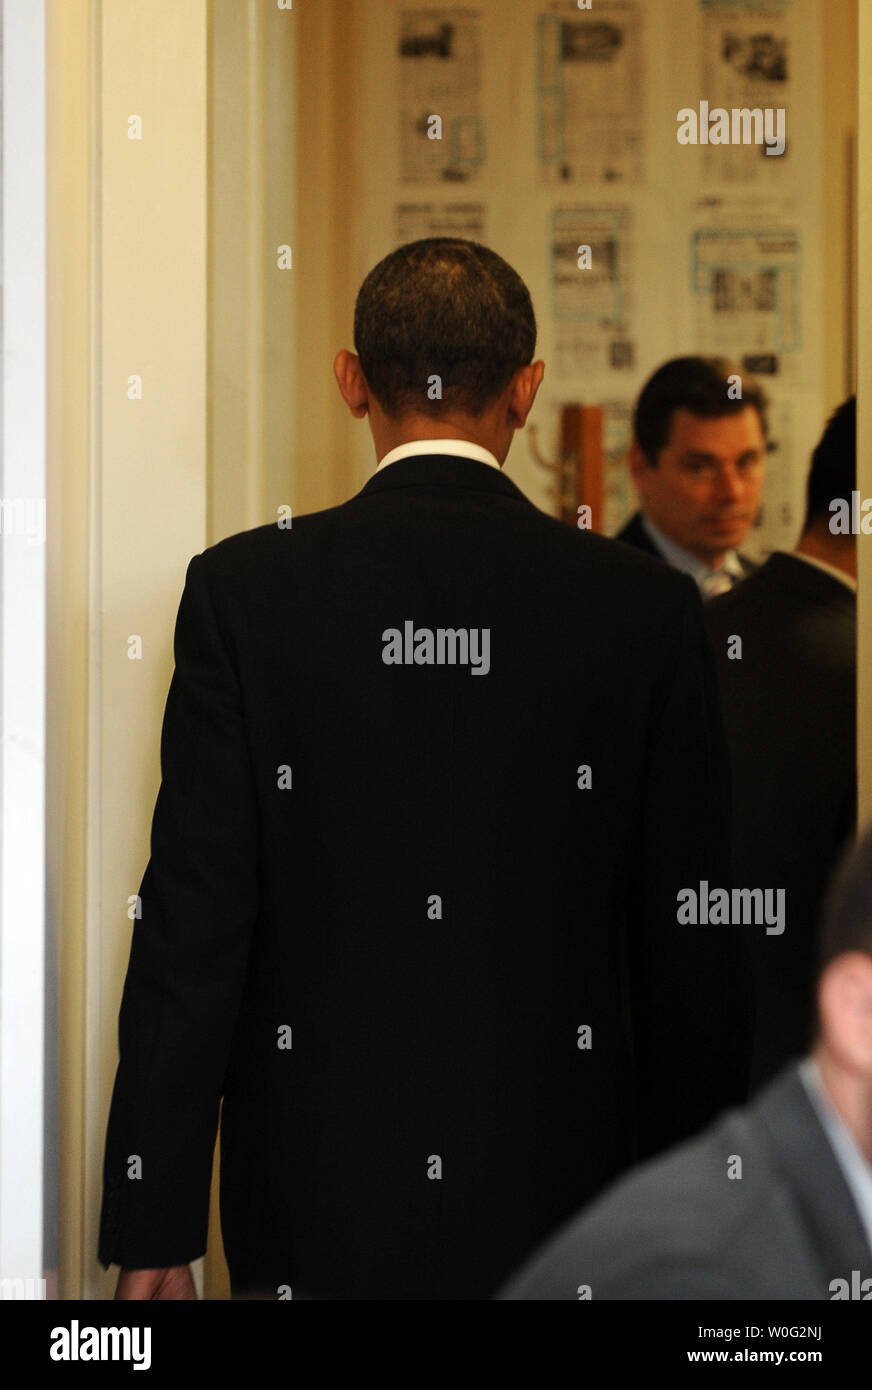 U.S. President Barack Obama departs after making a statement regarding bomb material found on cargo planes in the Brady Press Briefing Room of the White House in Washington on October 29, 2010.       UPI/Roger L. Wollenberg Stock Photo